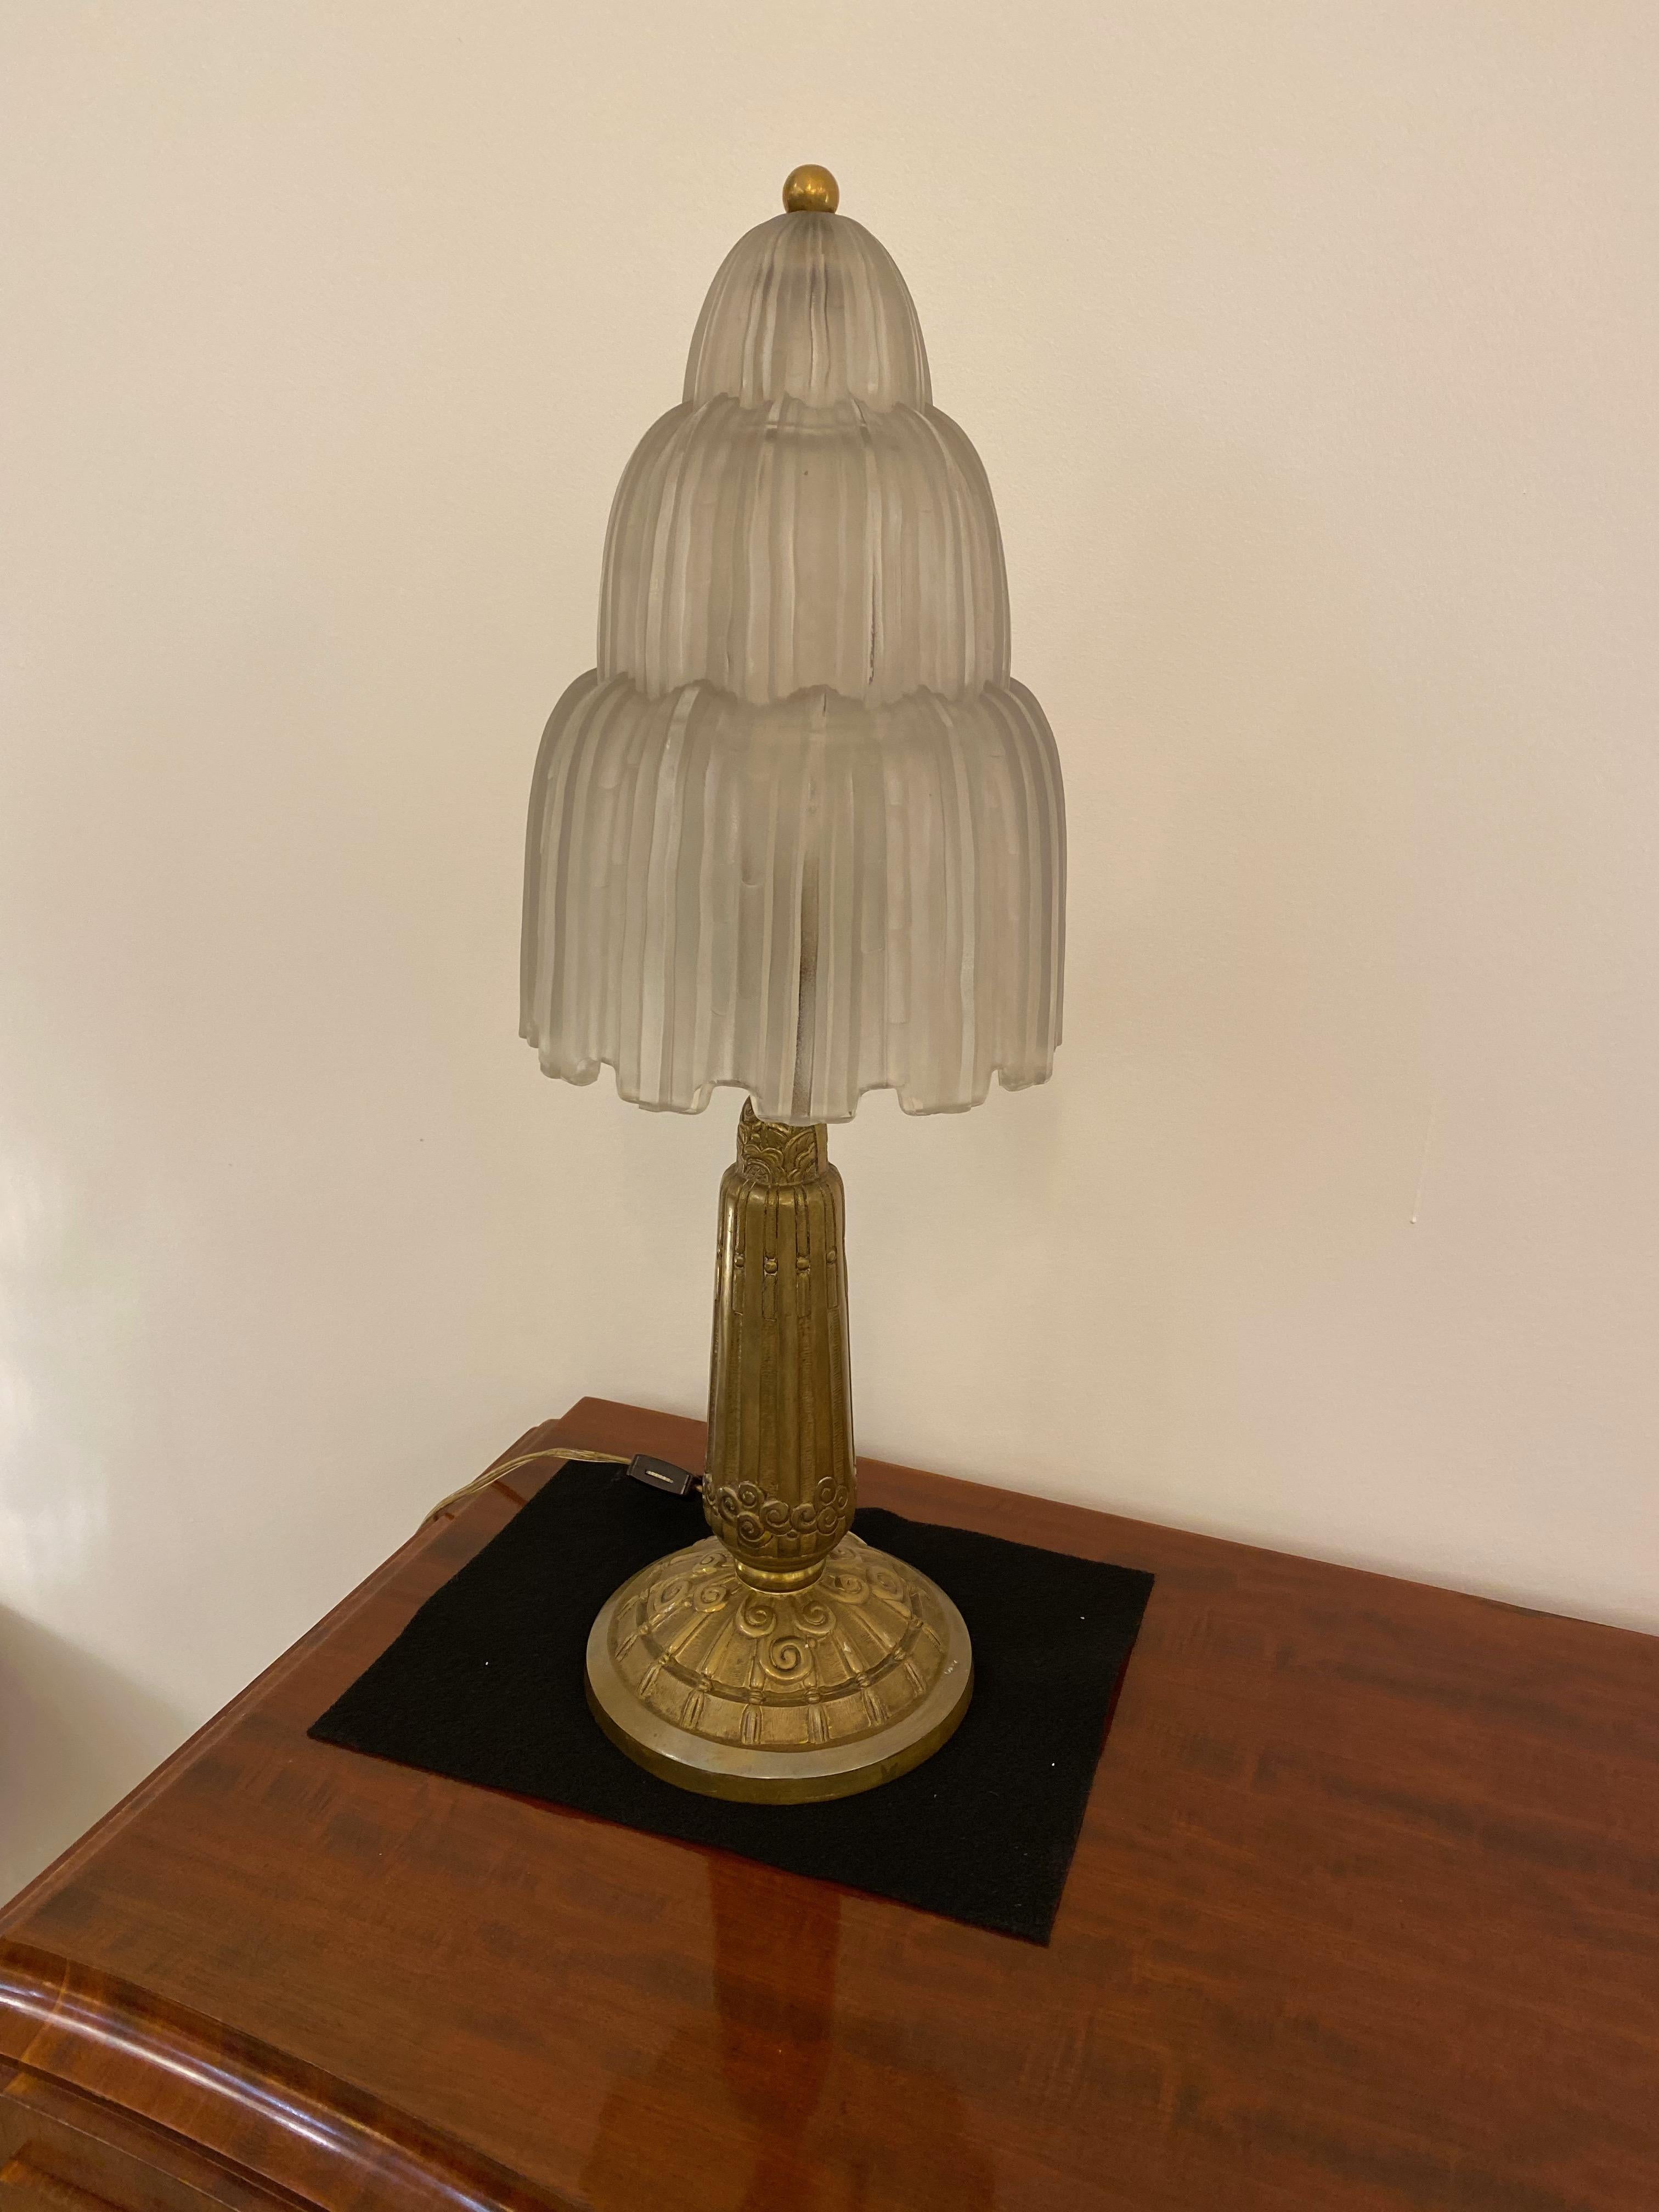 Single French Art Deco table lamp created by Marius Ernest Sabino. The shade is clear frosted glass with polished details referred to as the 